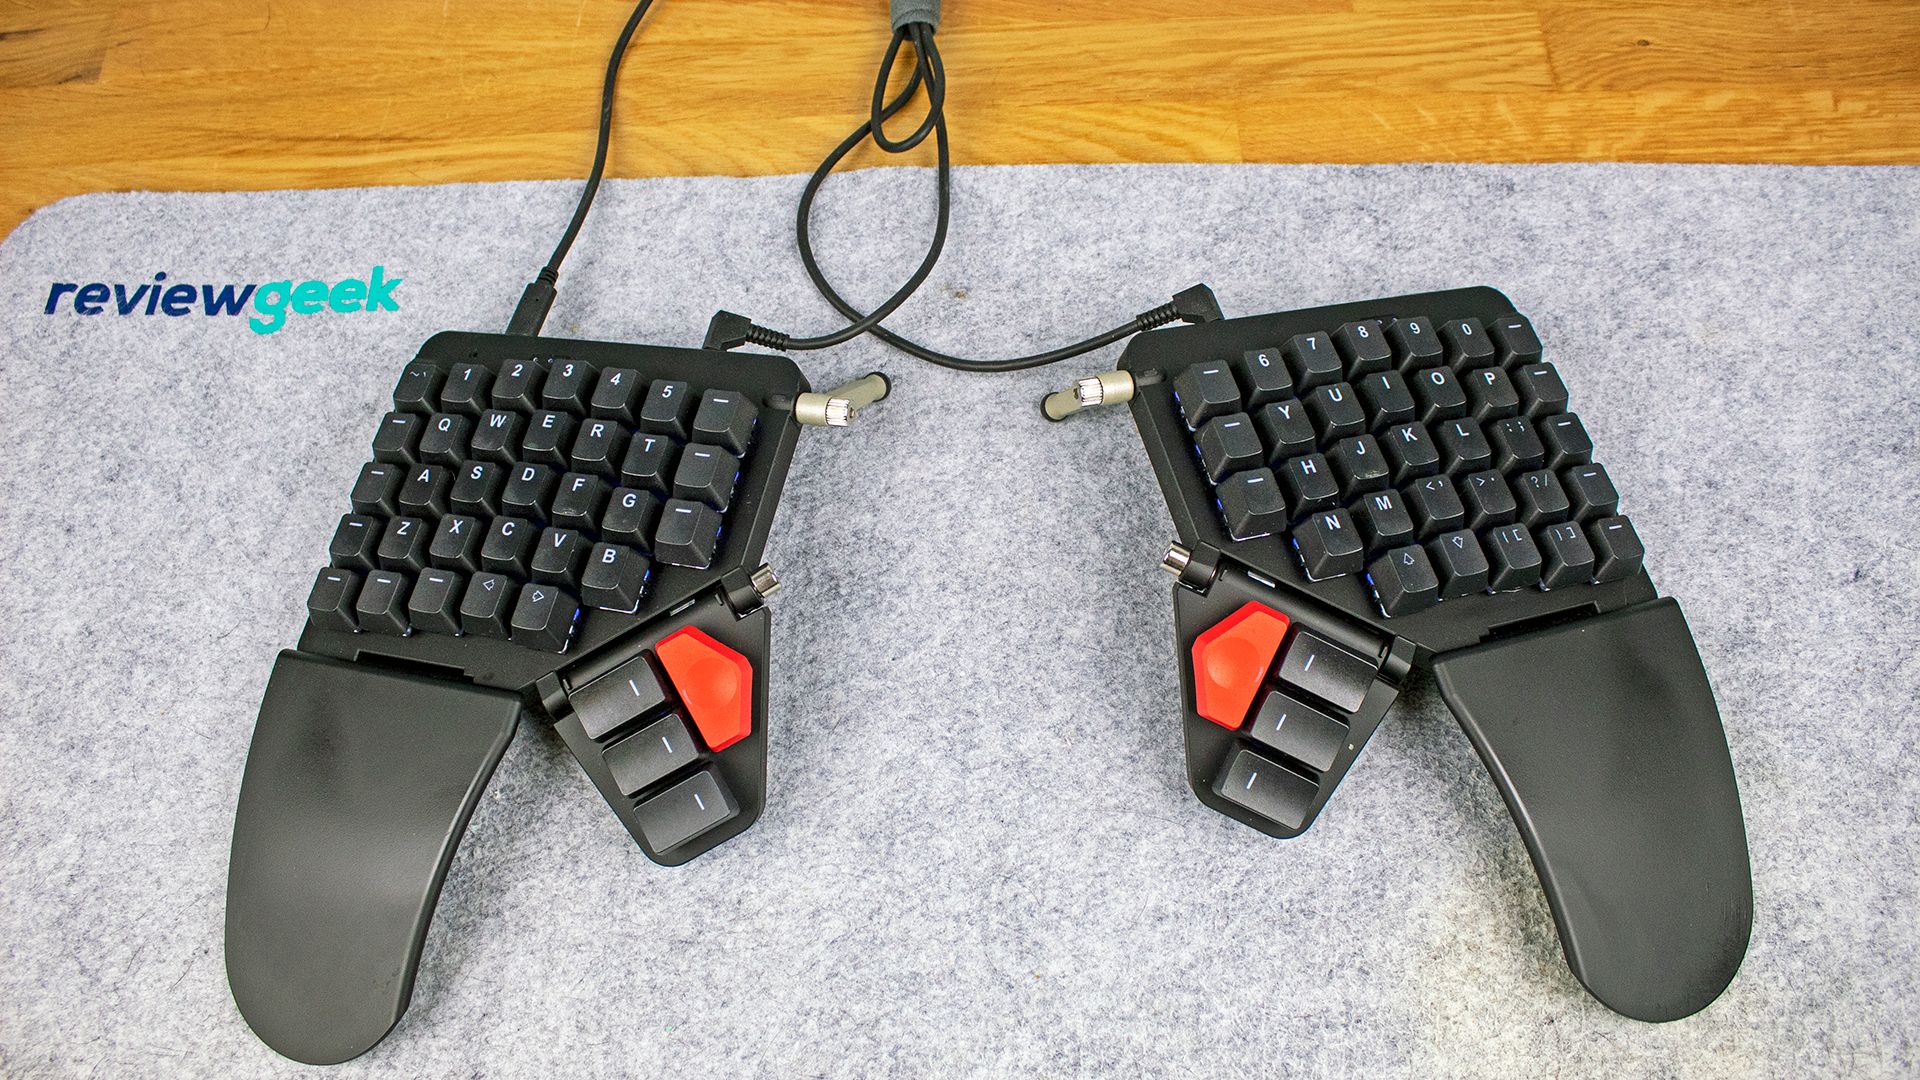 The Moonlander keyboard in a tented position